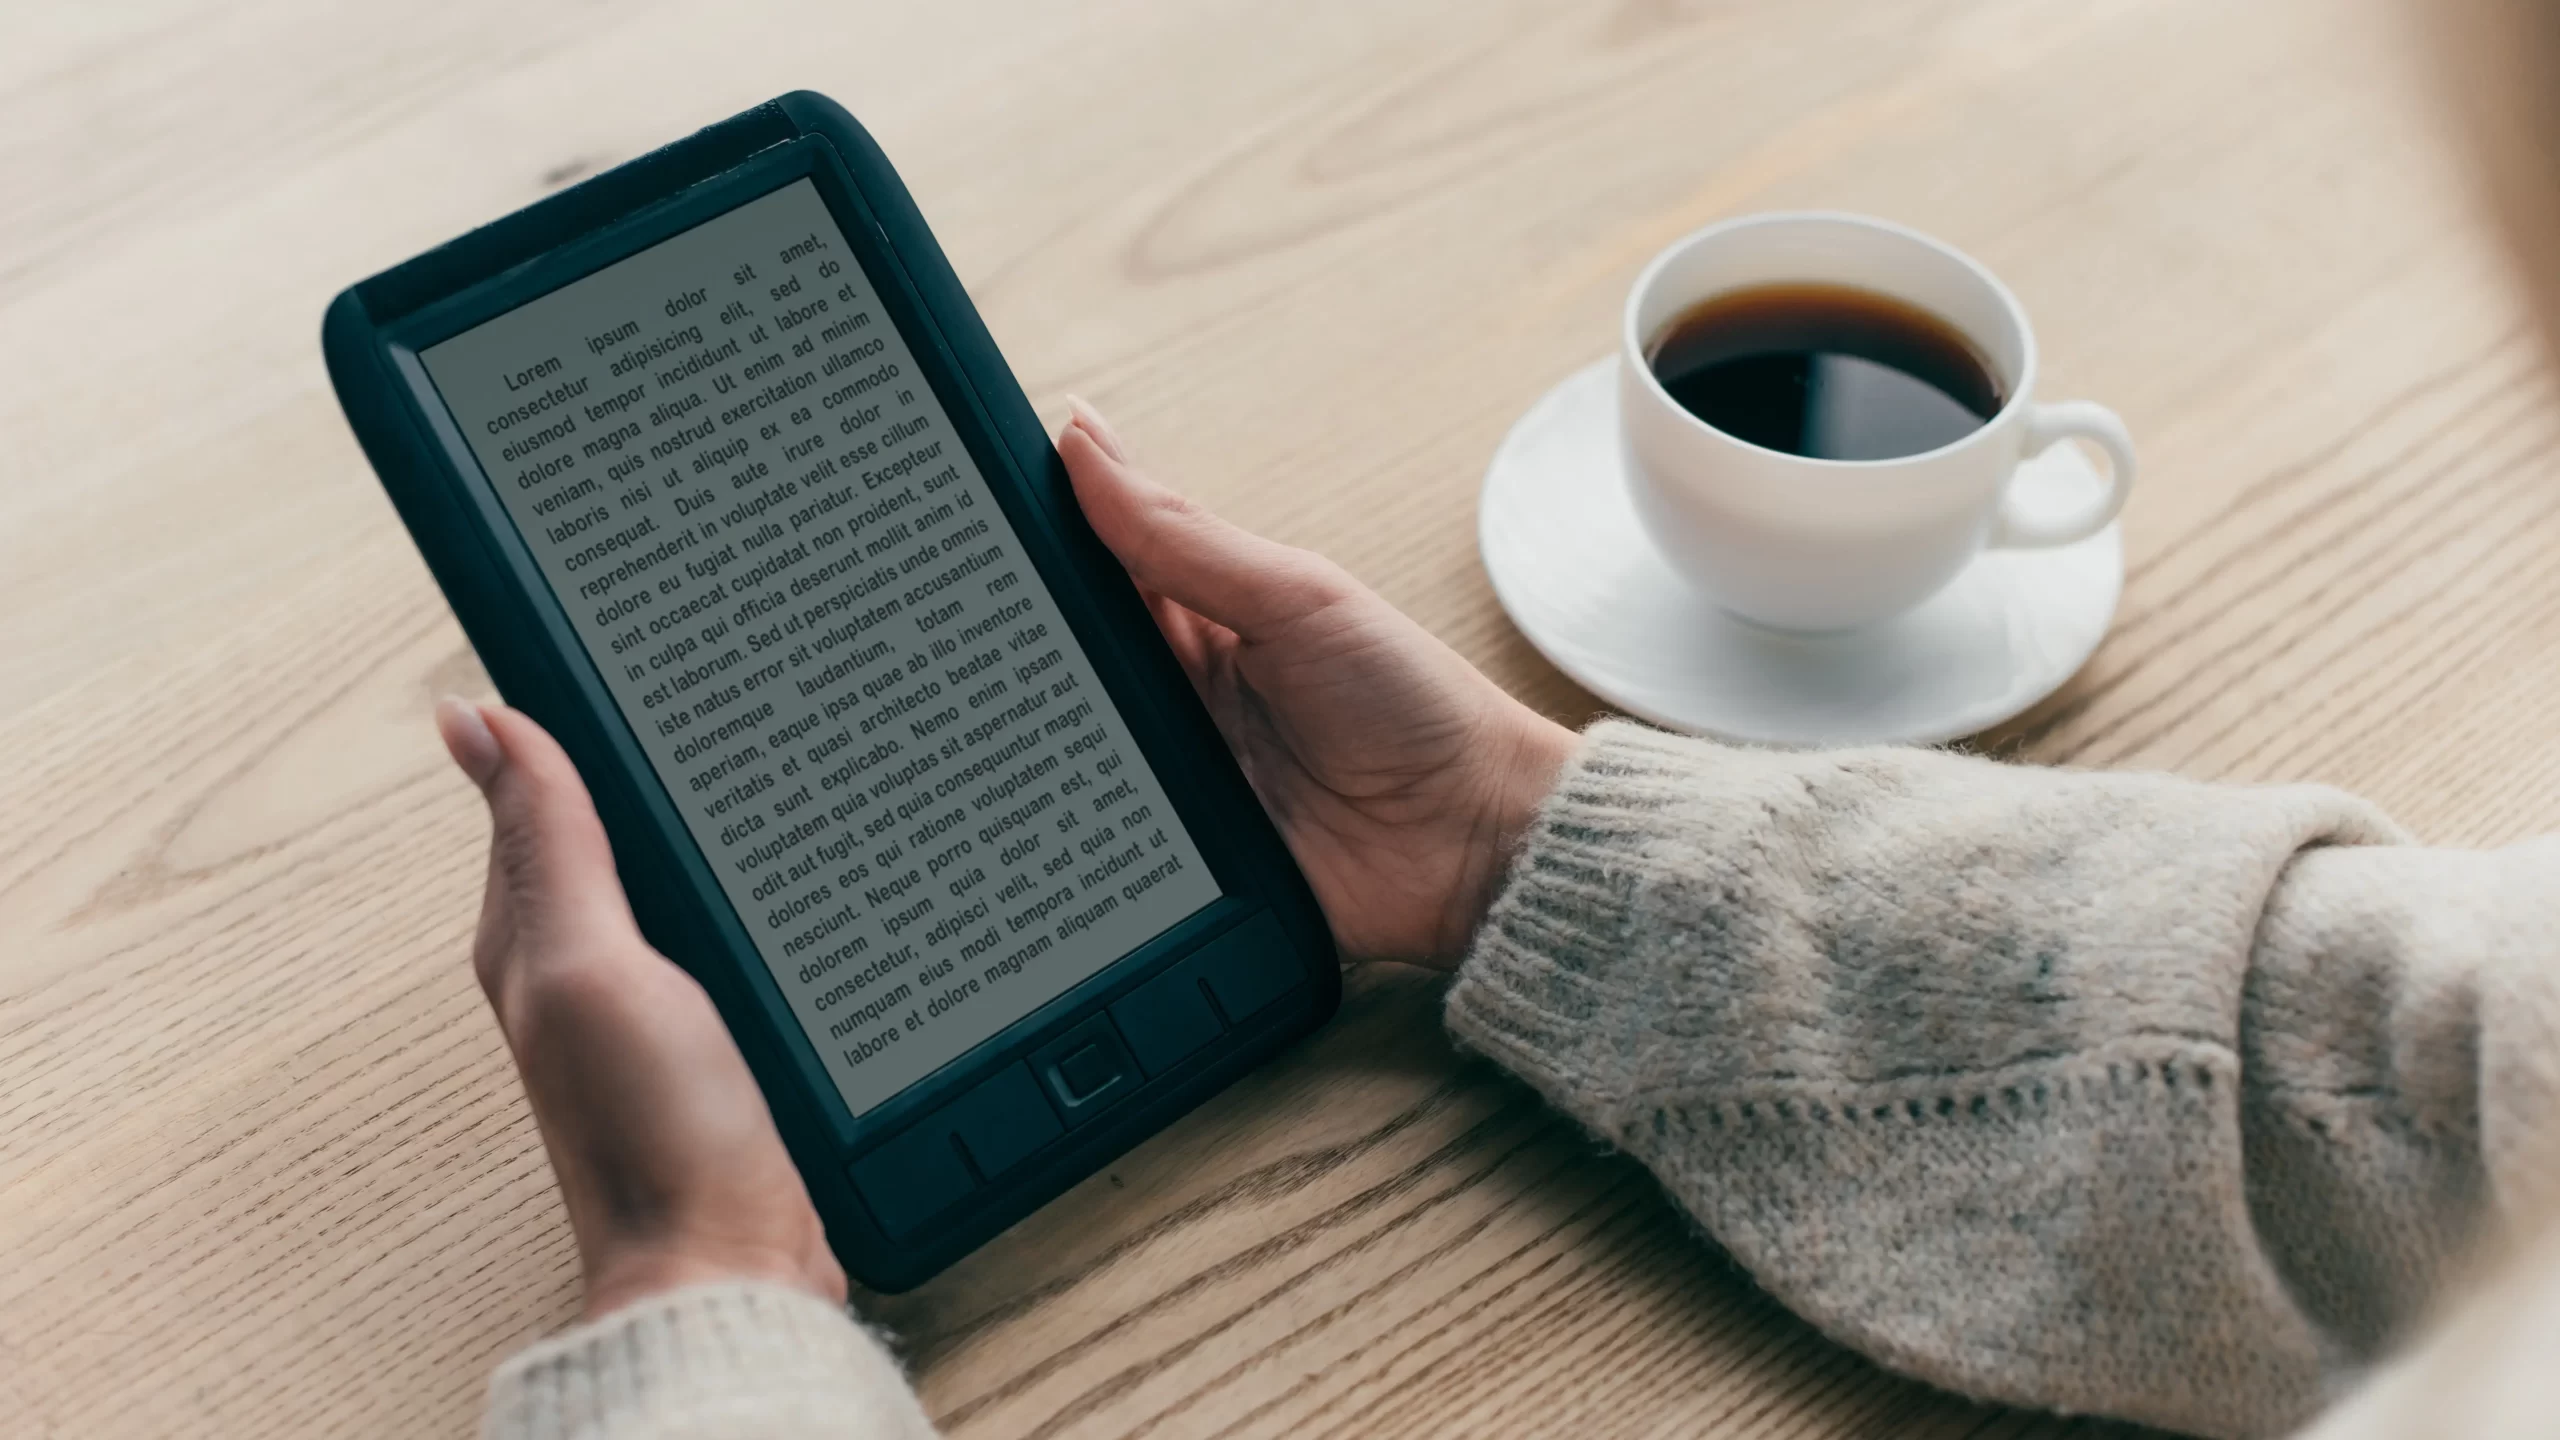 A person holding an ebook and a cup of coffee